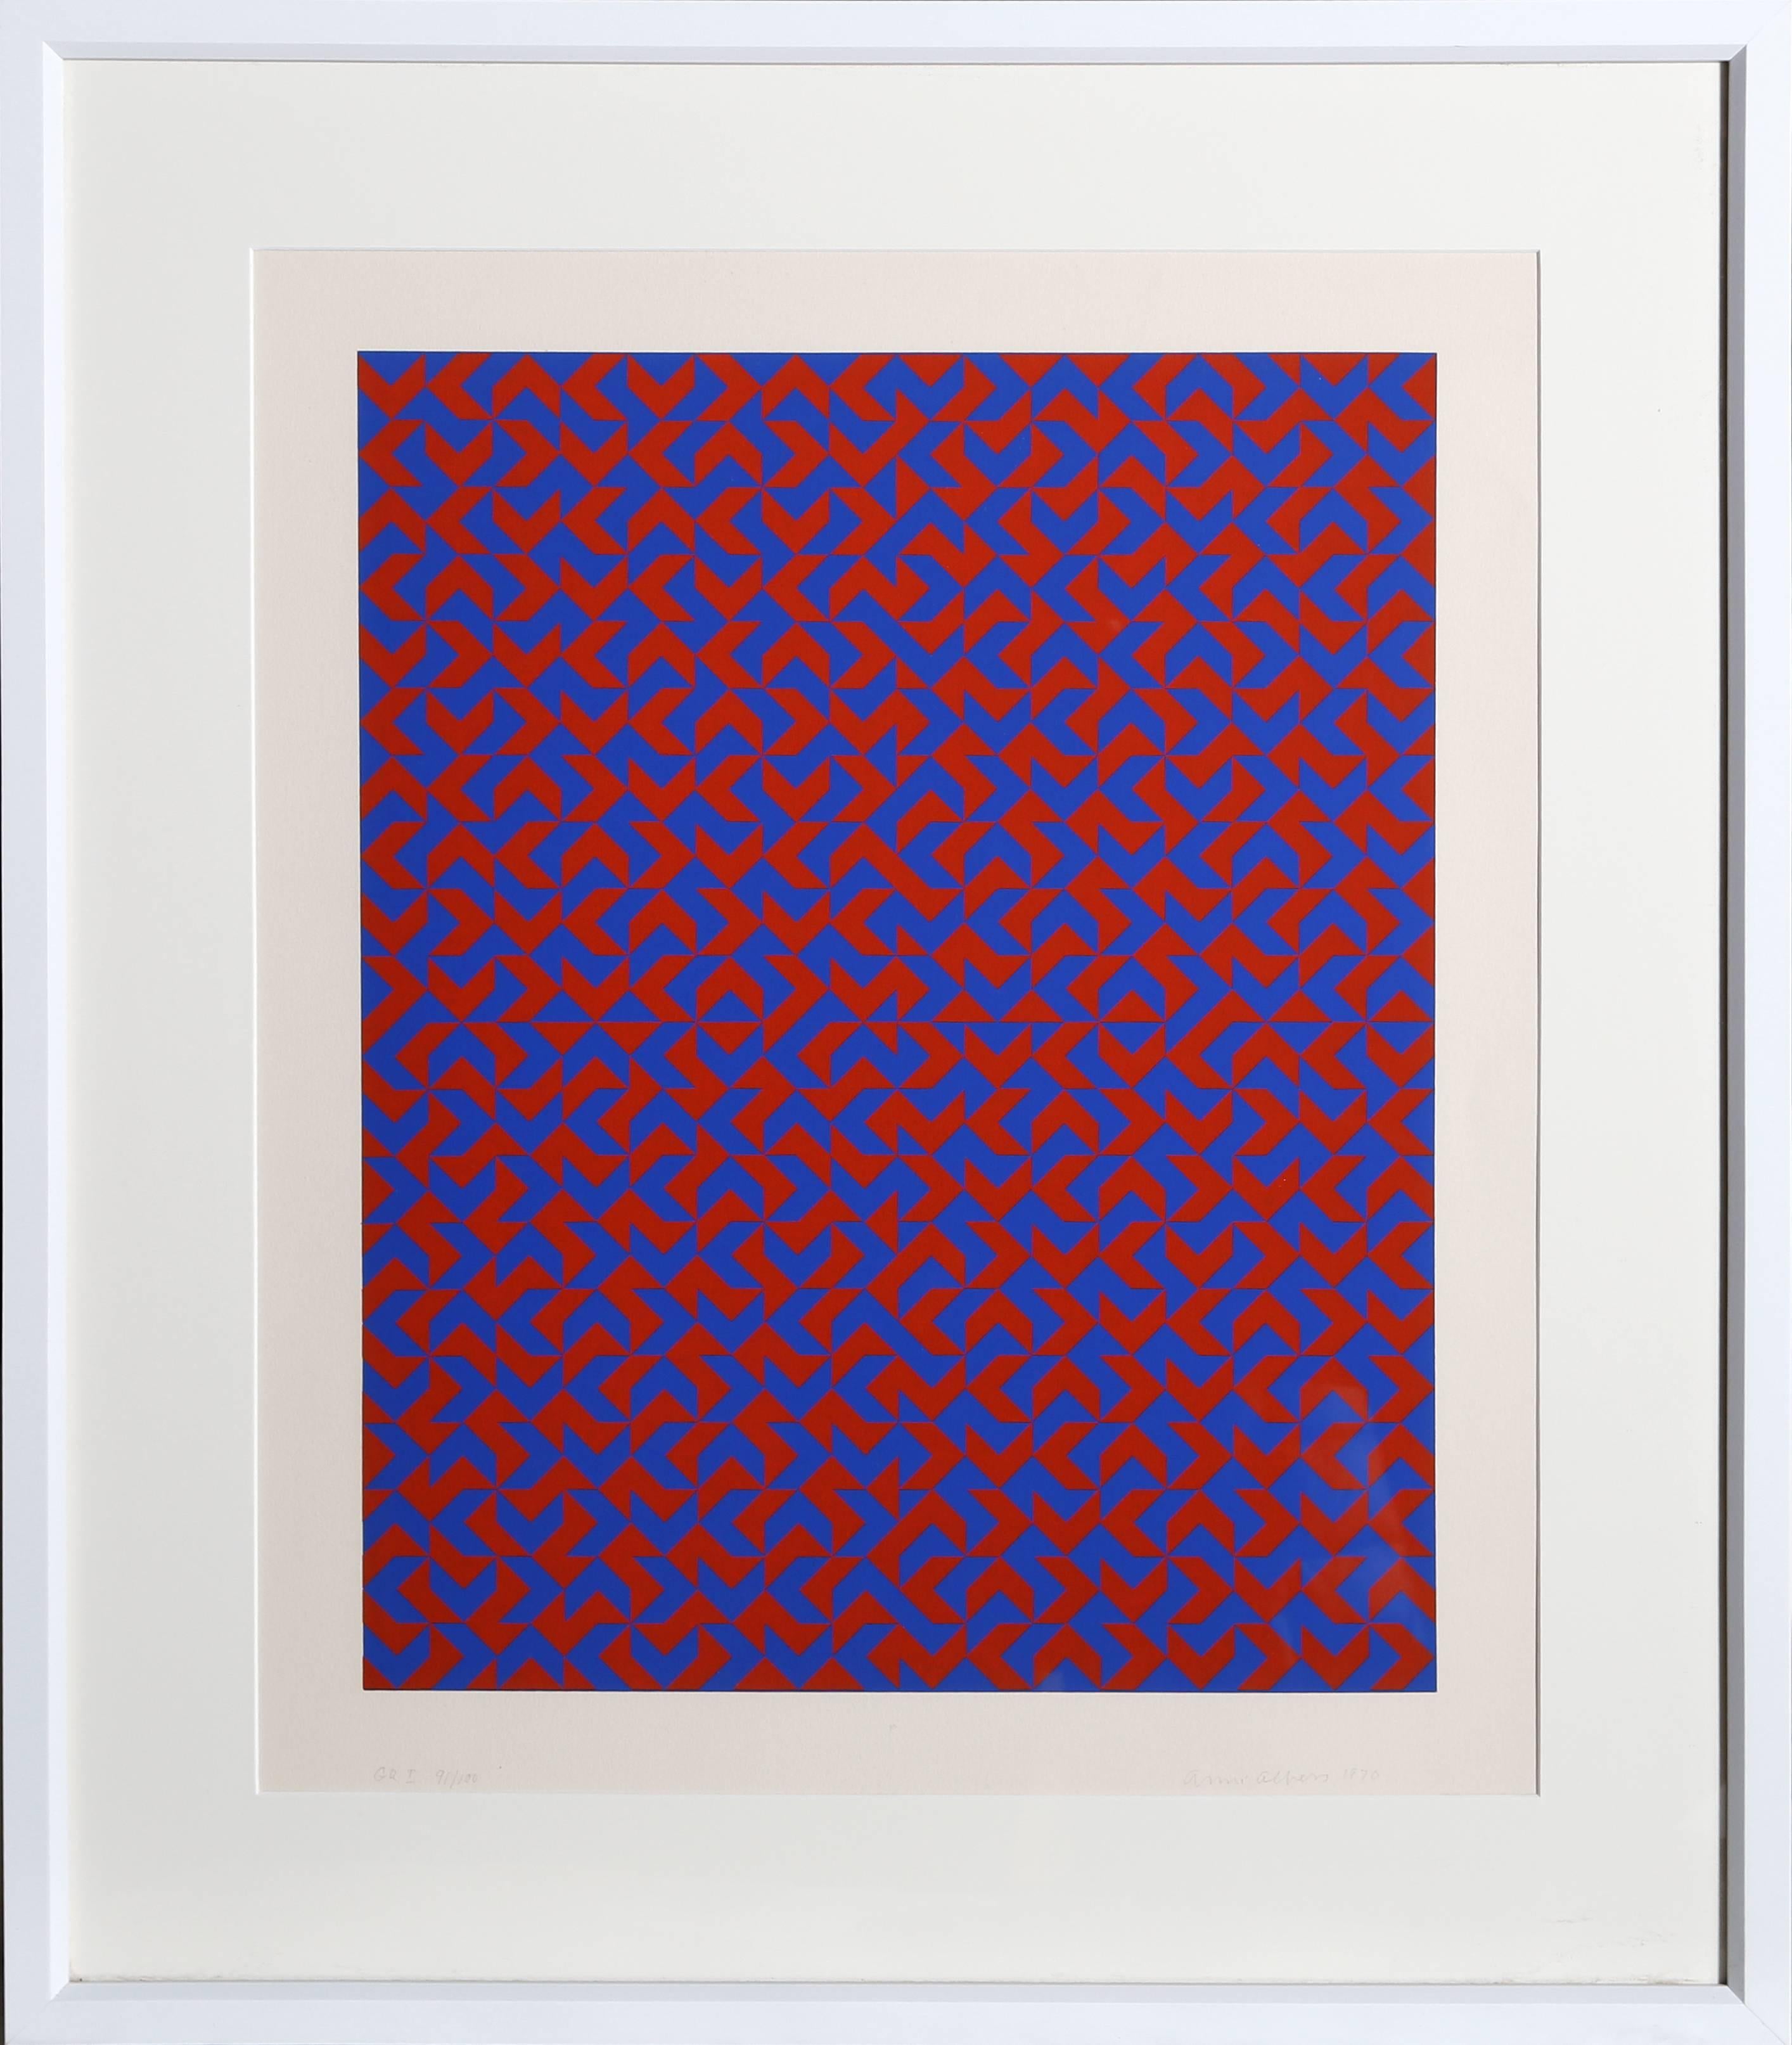 Artist: Anni Albers, German/American (1899 - 1994)
Title: GR I
Year: 1970
Medium: Silkscreen, signed and numbered in pencil
Edition: 100
Image Size: 20 x 16 inches
Size: 29 x 24 in. (73.66 x 60.96 cm)
Frame: 32 x 28 inches